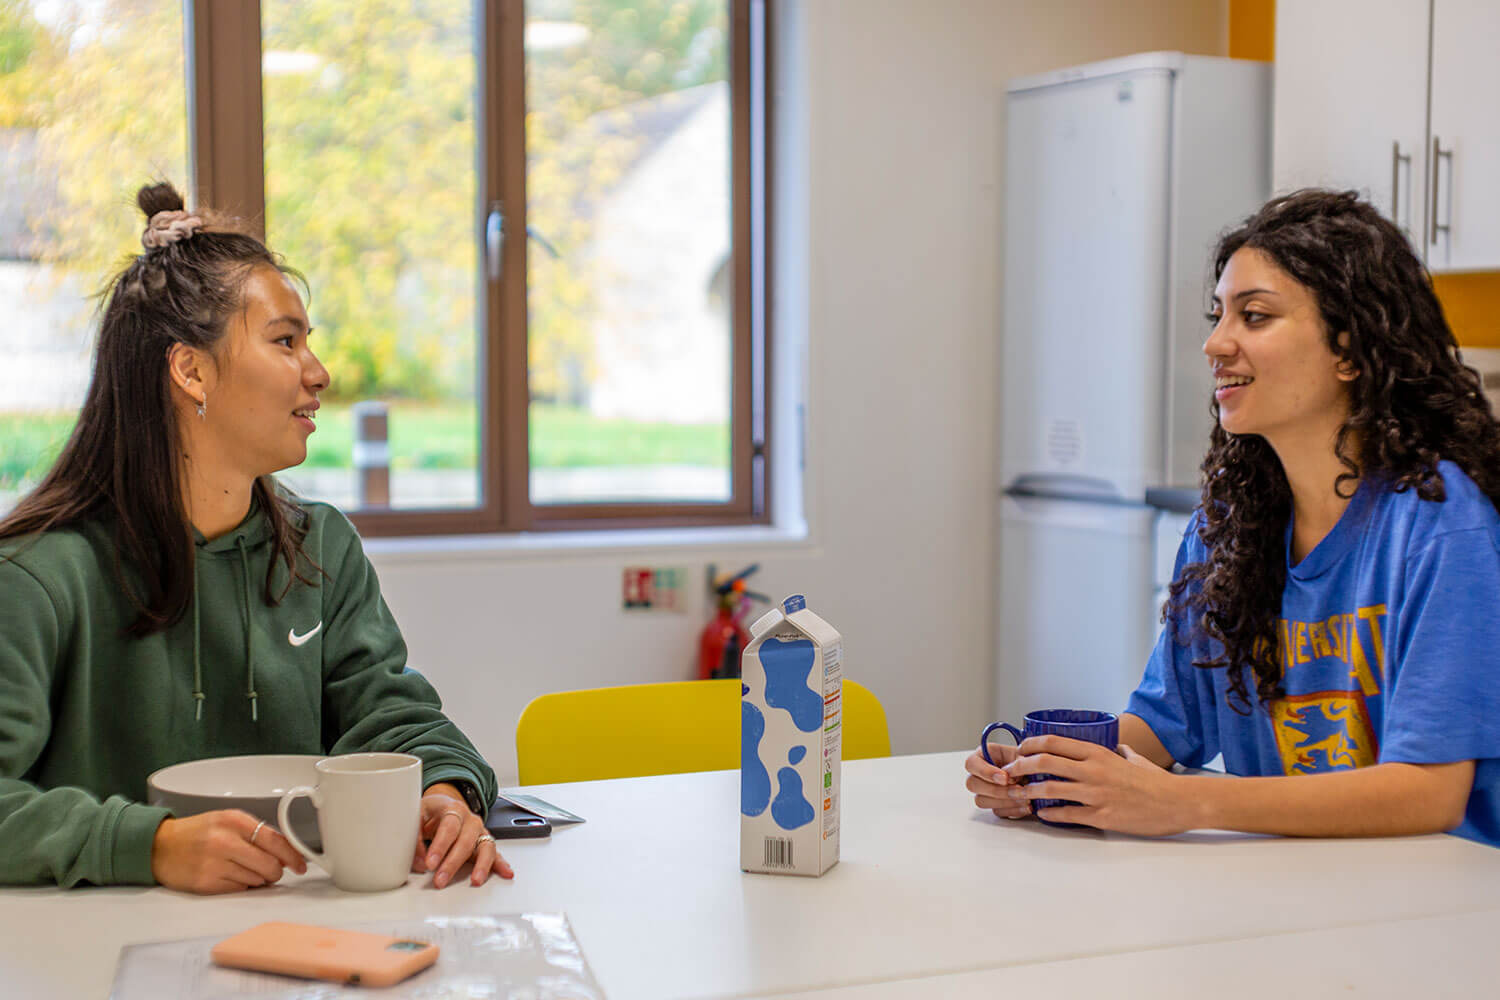 Students talking in a shared student kitchen